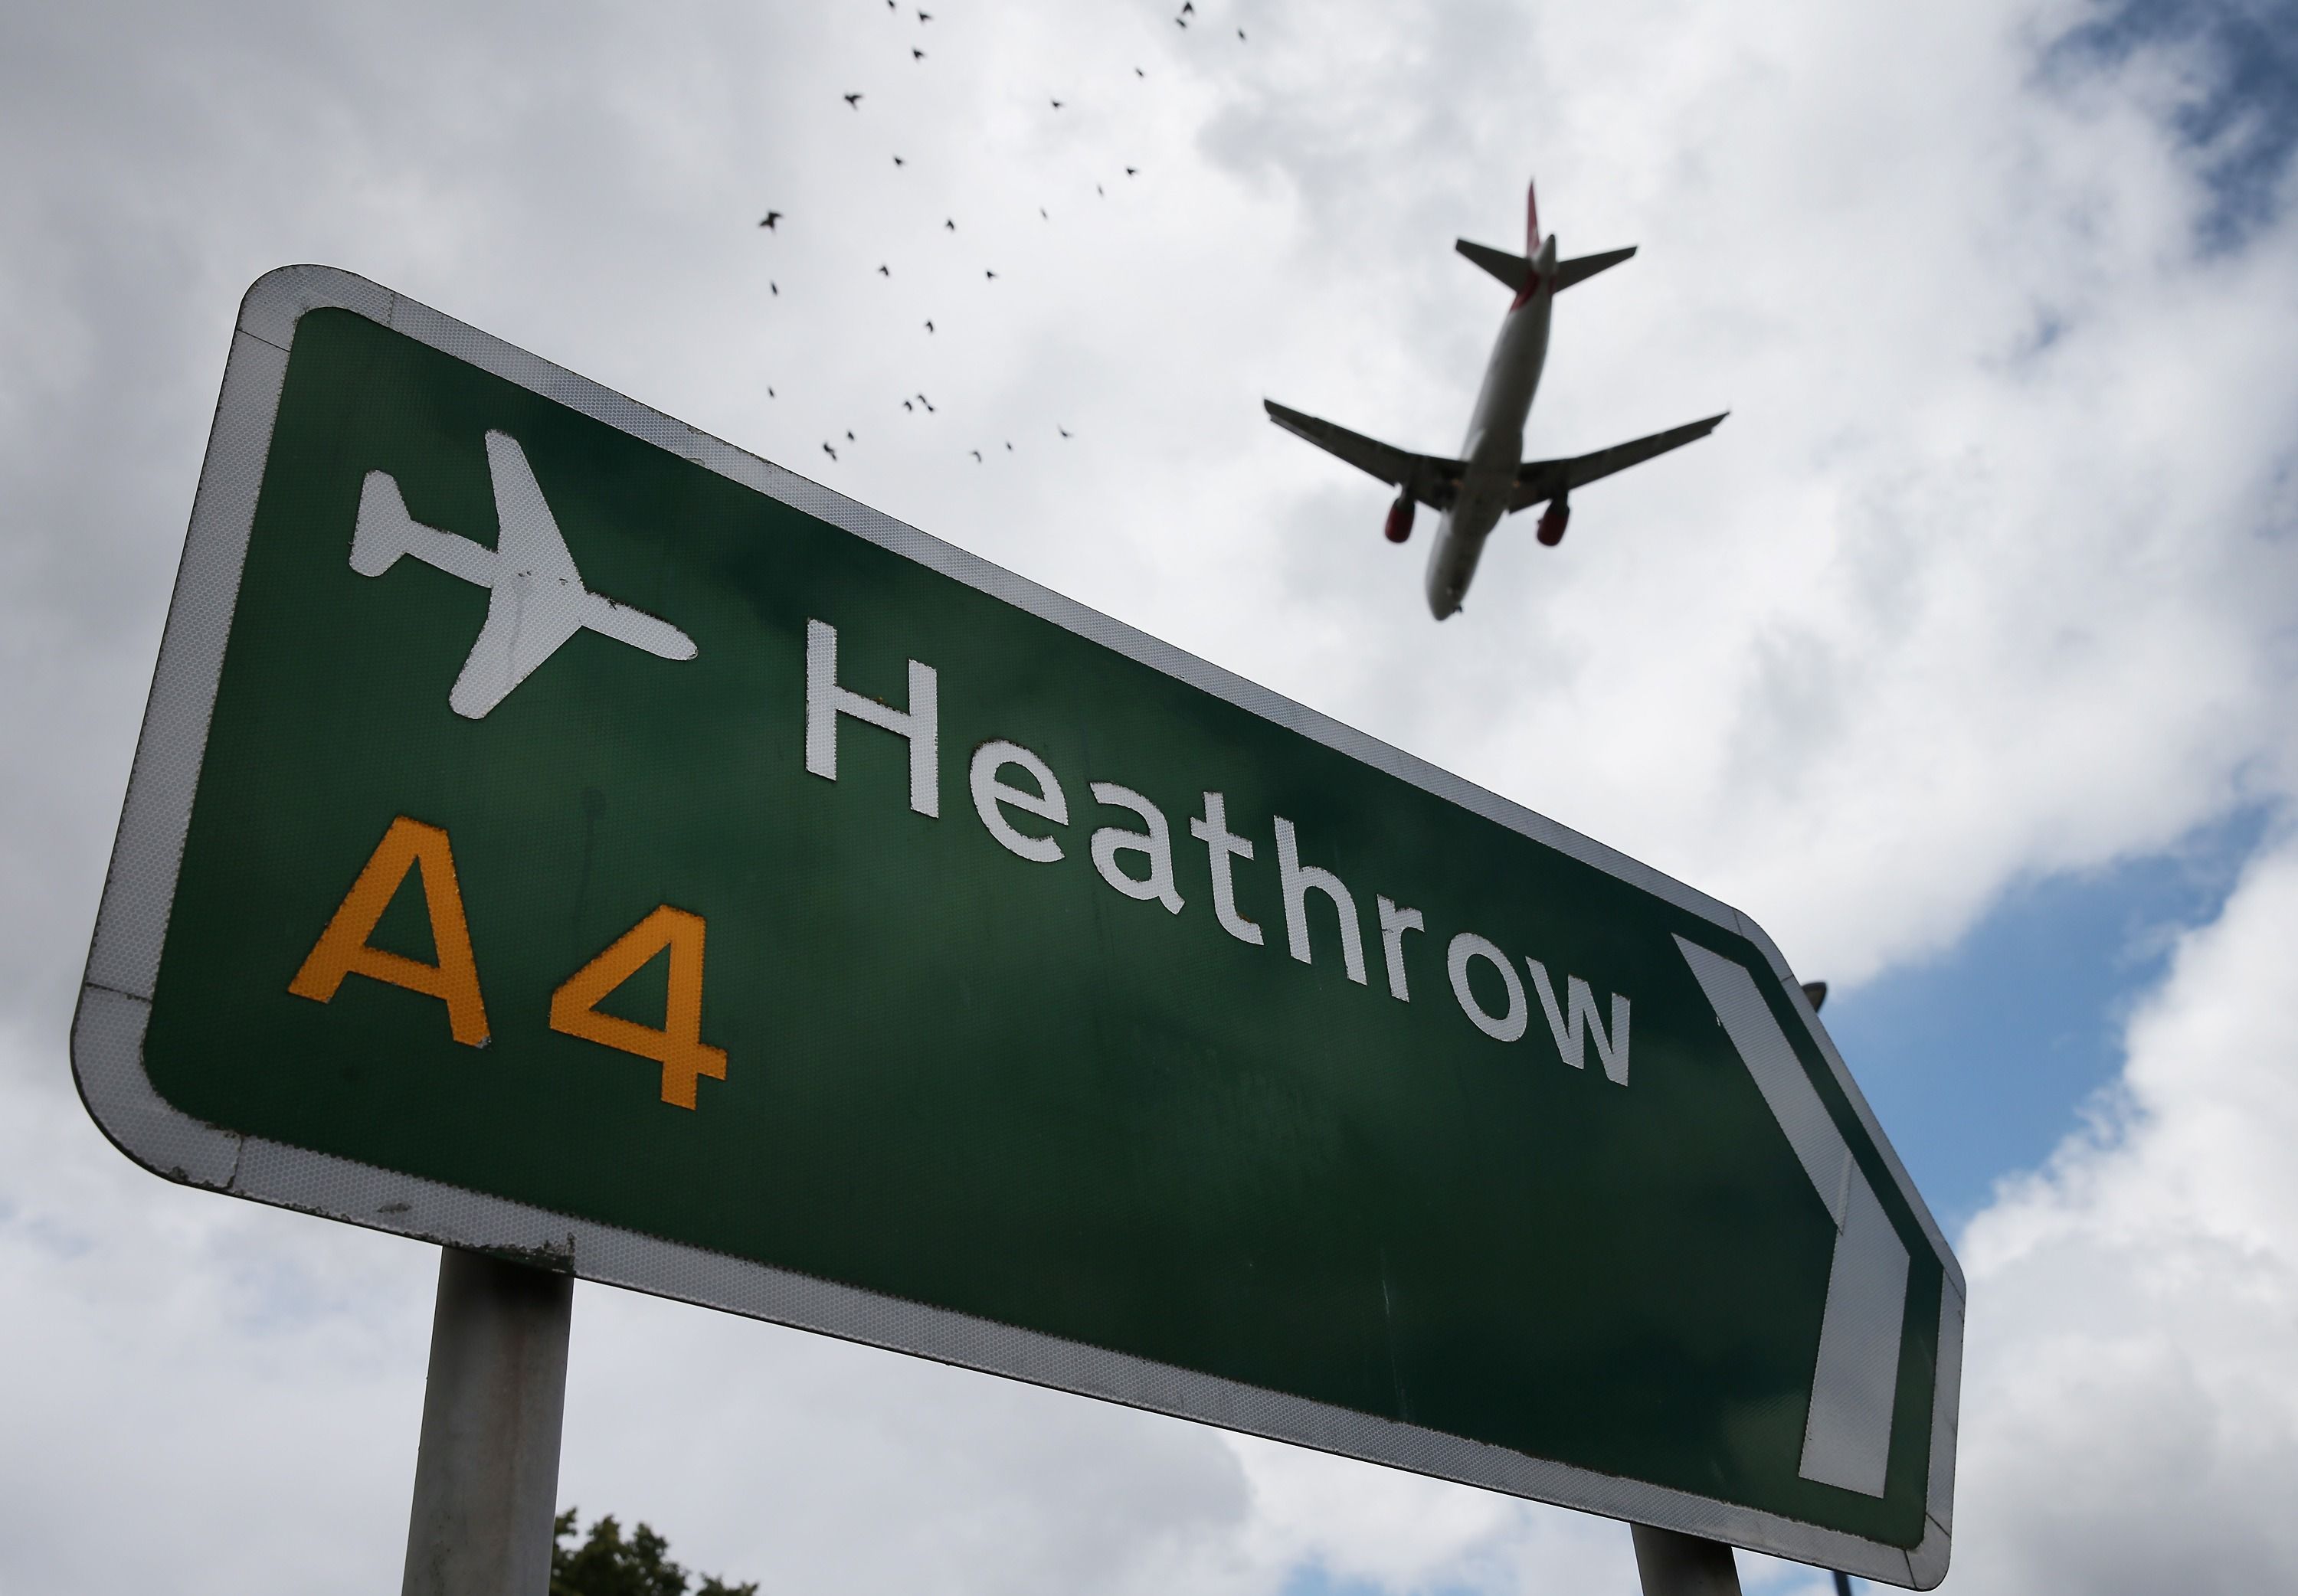 Heathrow sign with aircraft flying above